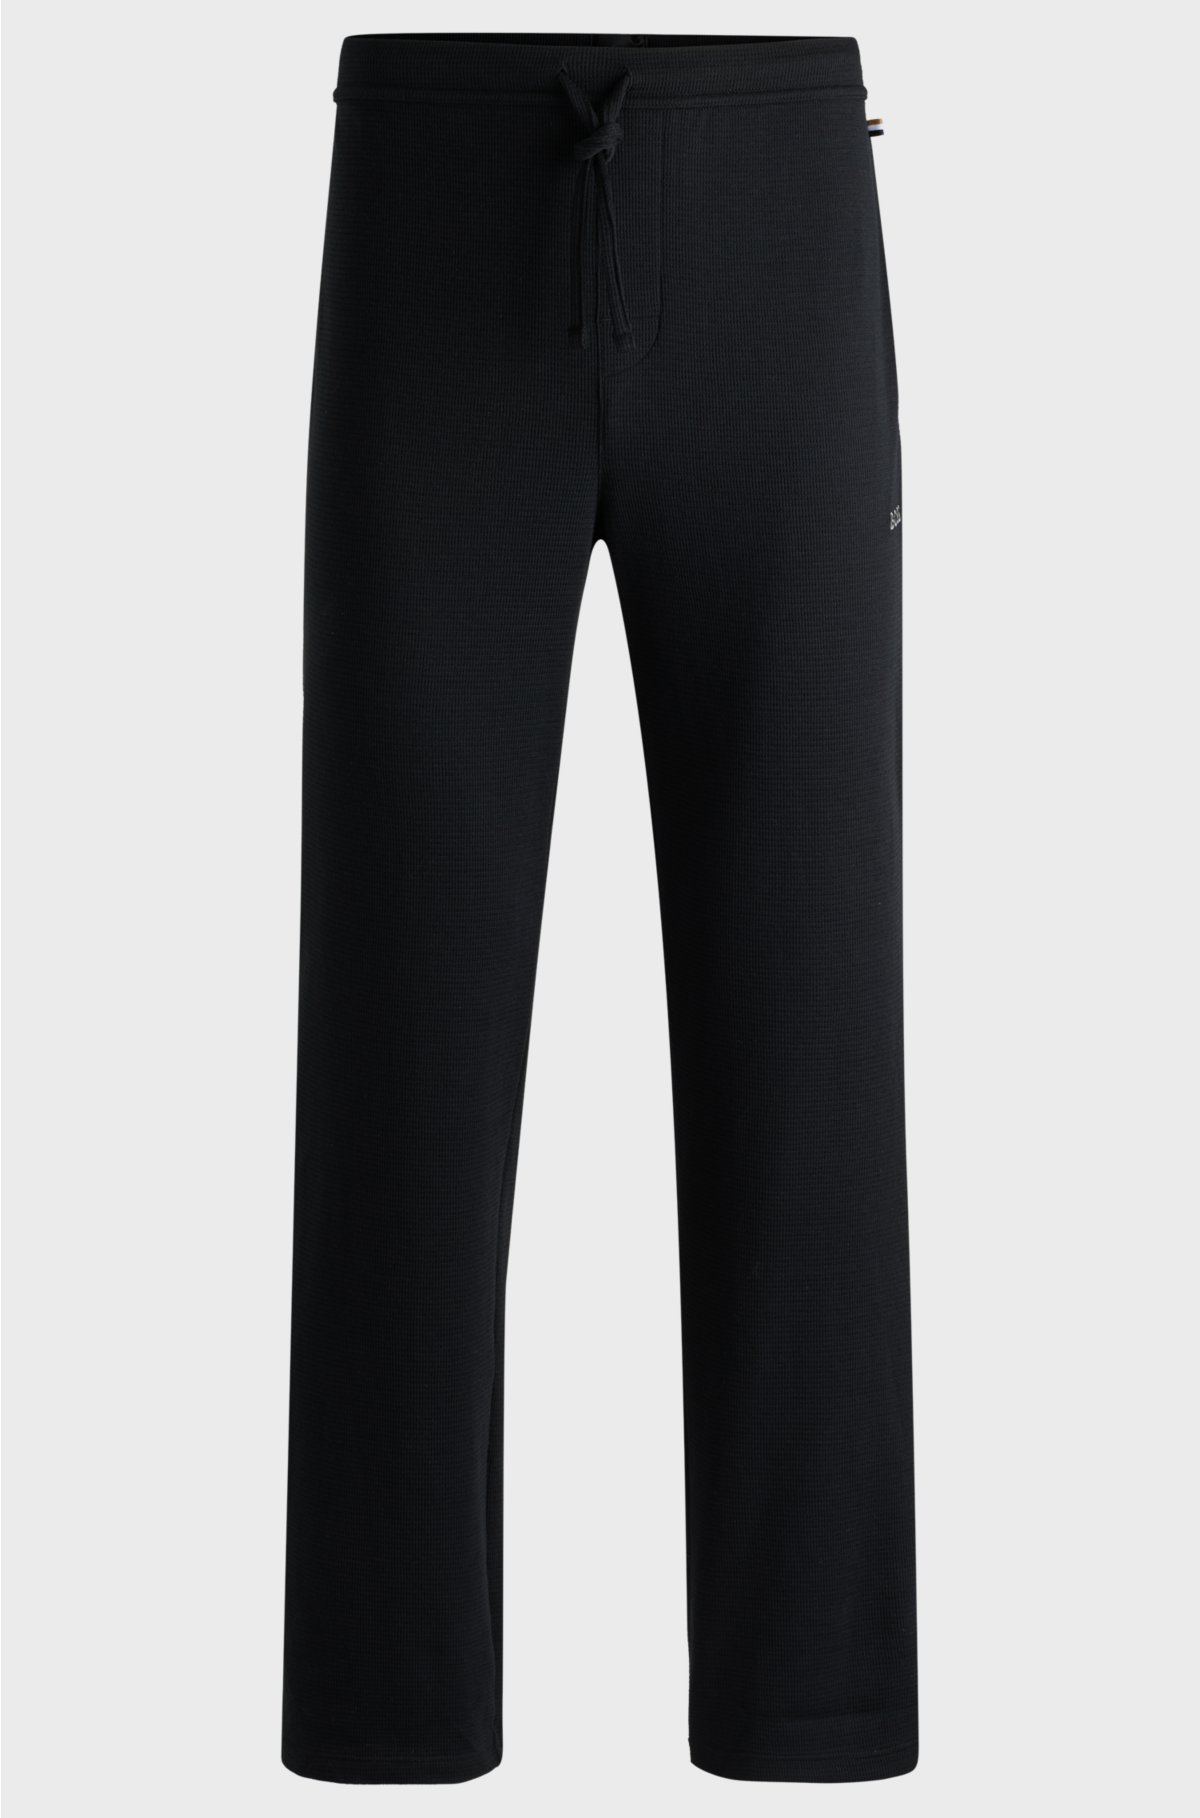 Cotton-blend pyjama bottoms with embroidered logo, Black